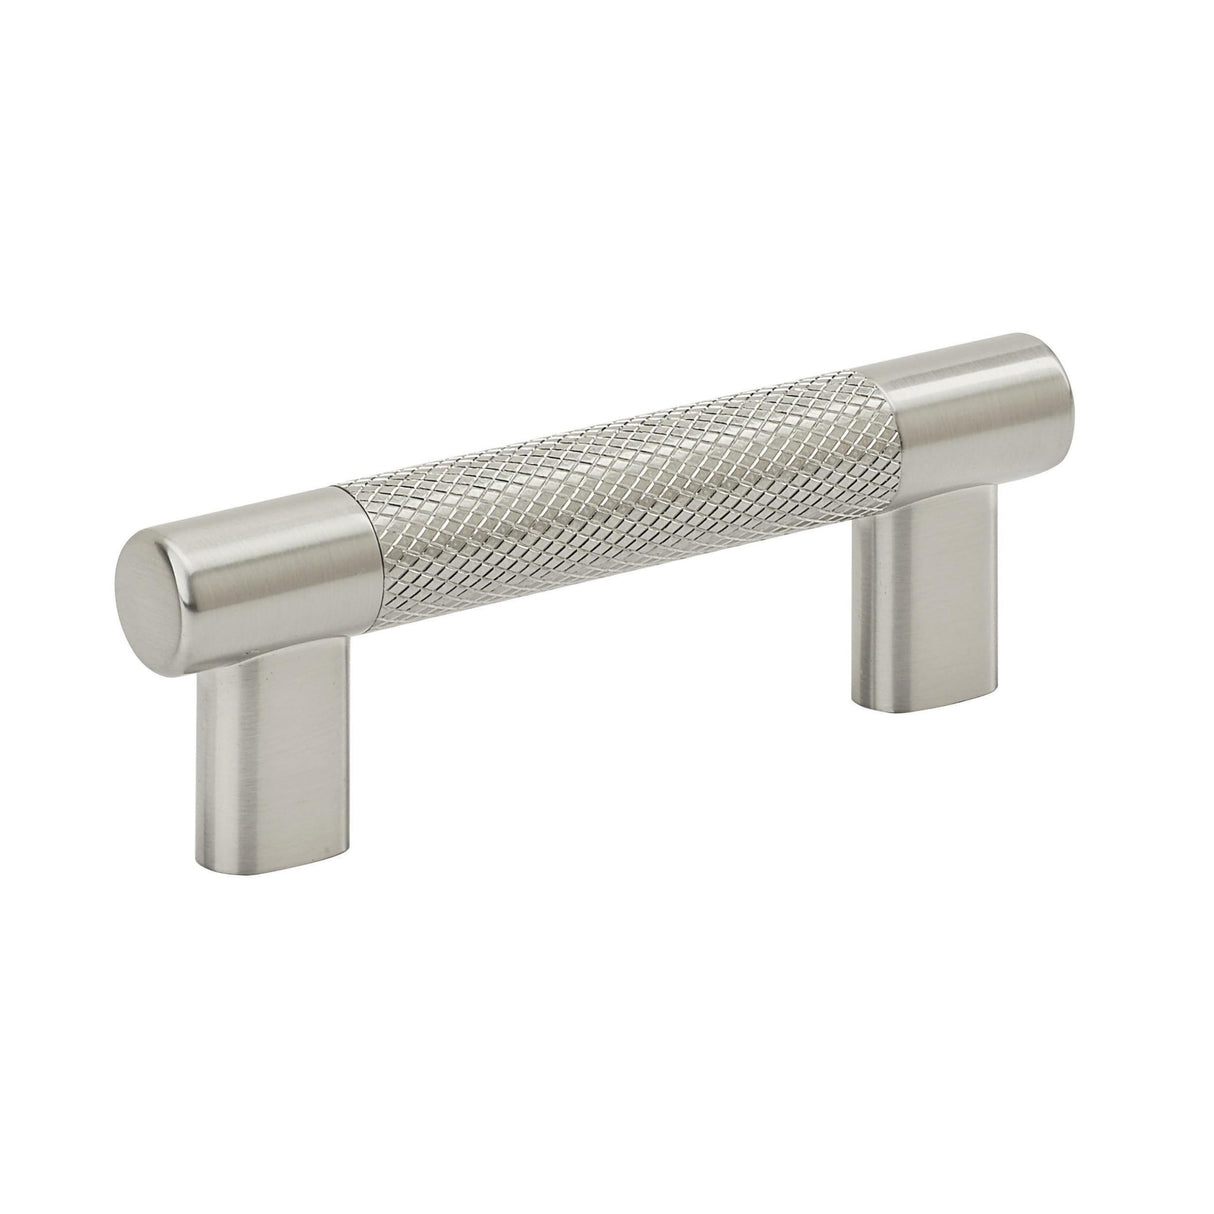 Amerock Kitchen Cabinet Pull Satin Nickel 3 in & -3/4 in (76 mm & 96 mm) Center-to-Center Bronx 1 Pack Furniture Hardware Cabinet Handle Bathroom Drawer Pull